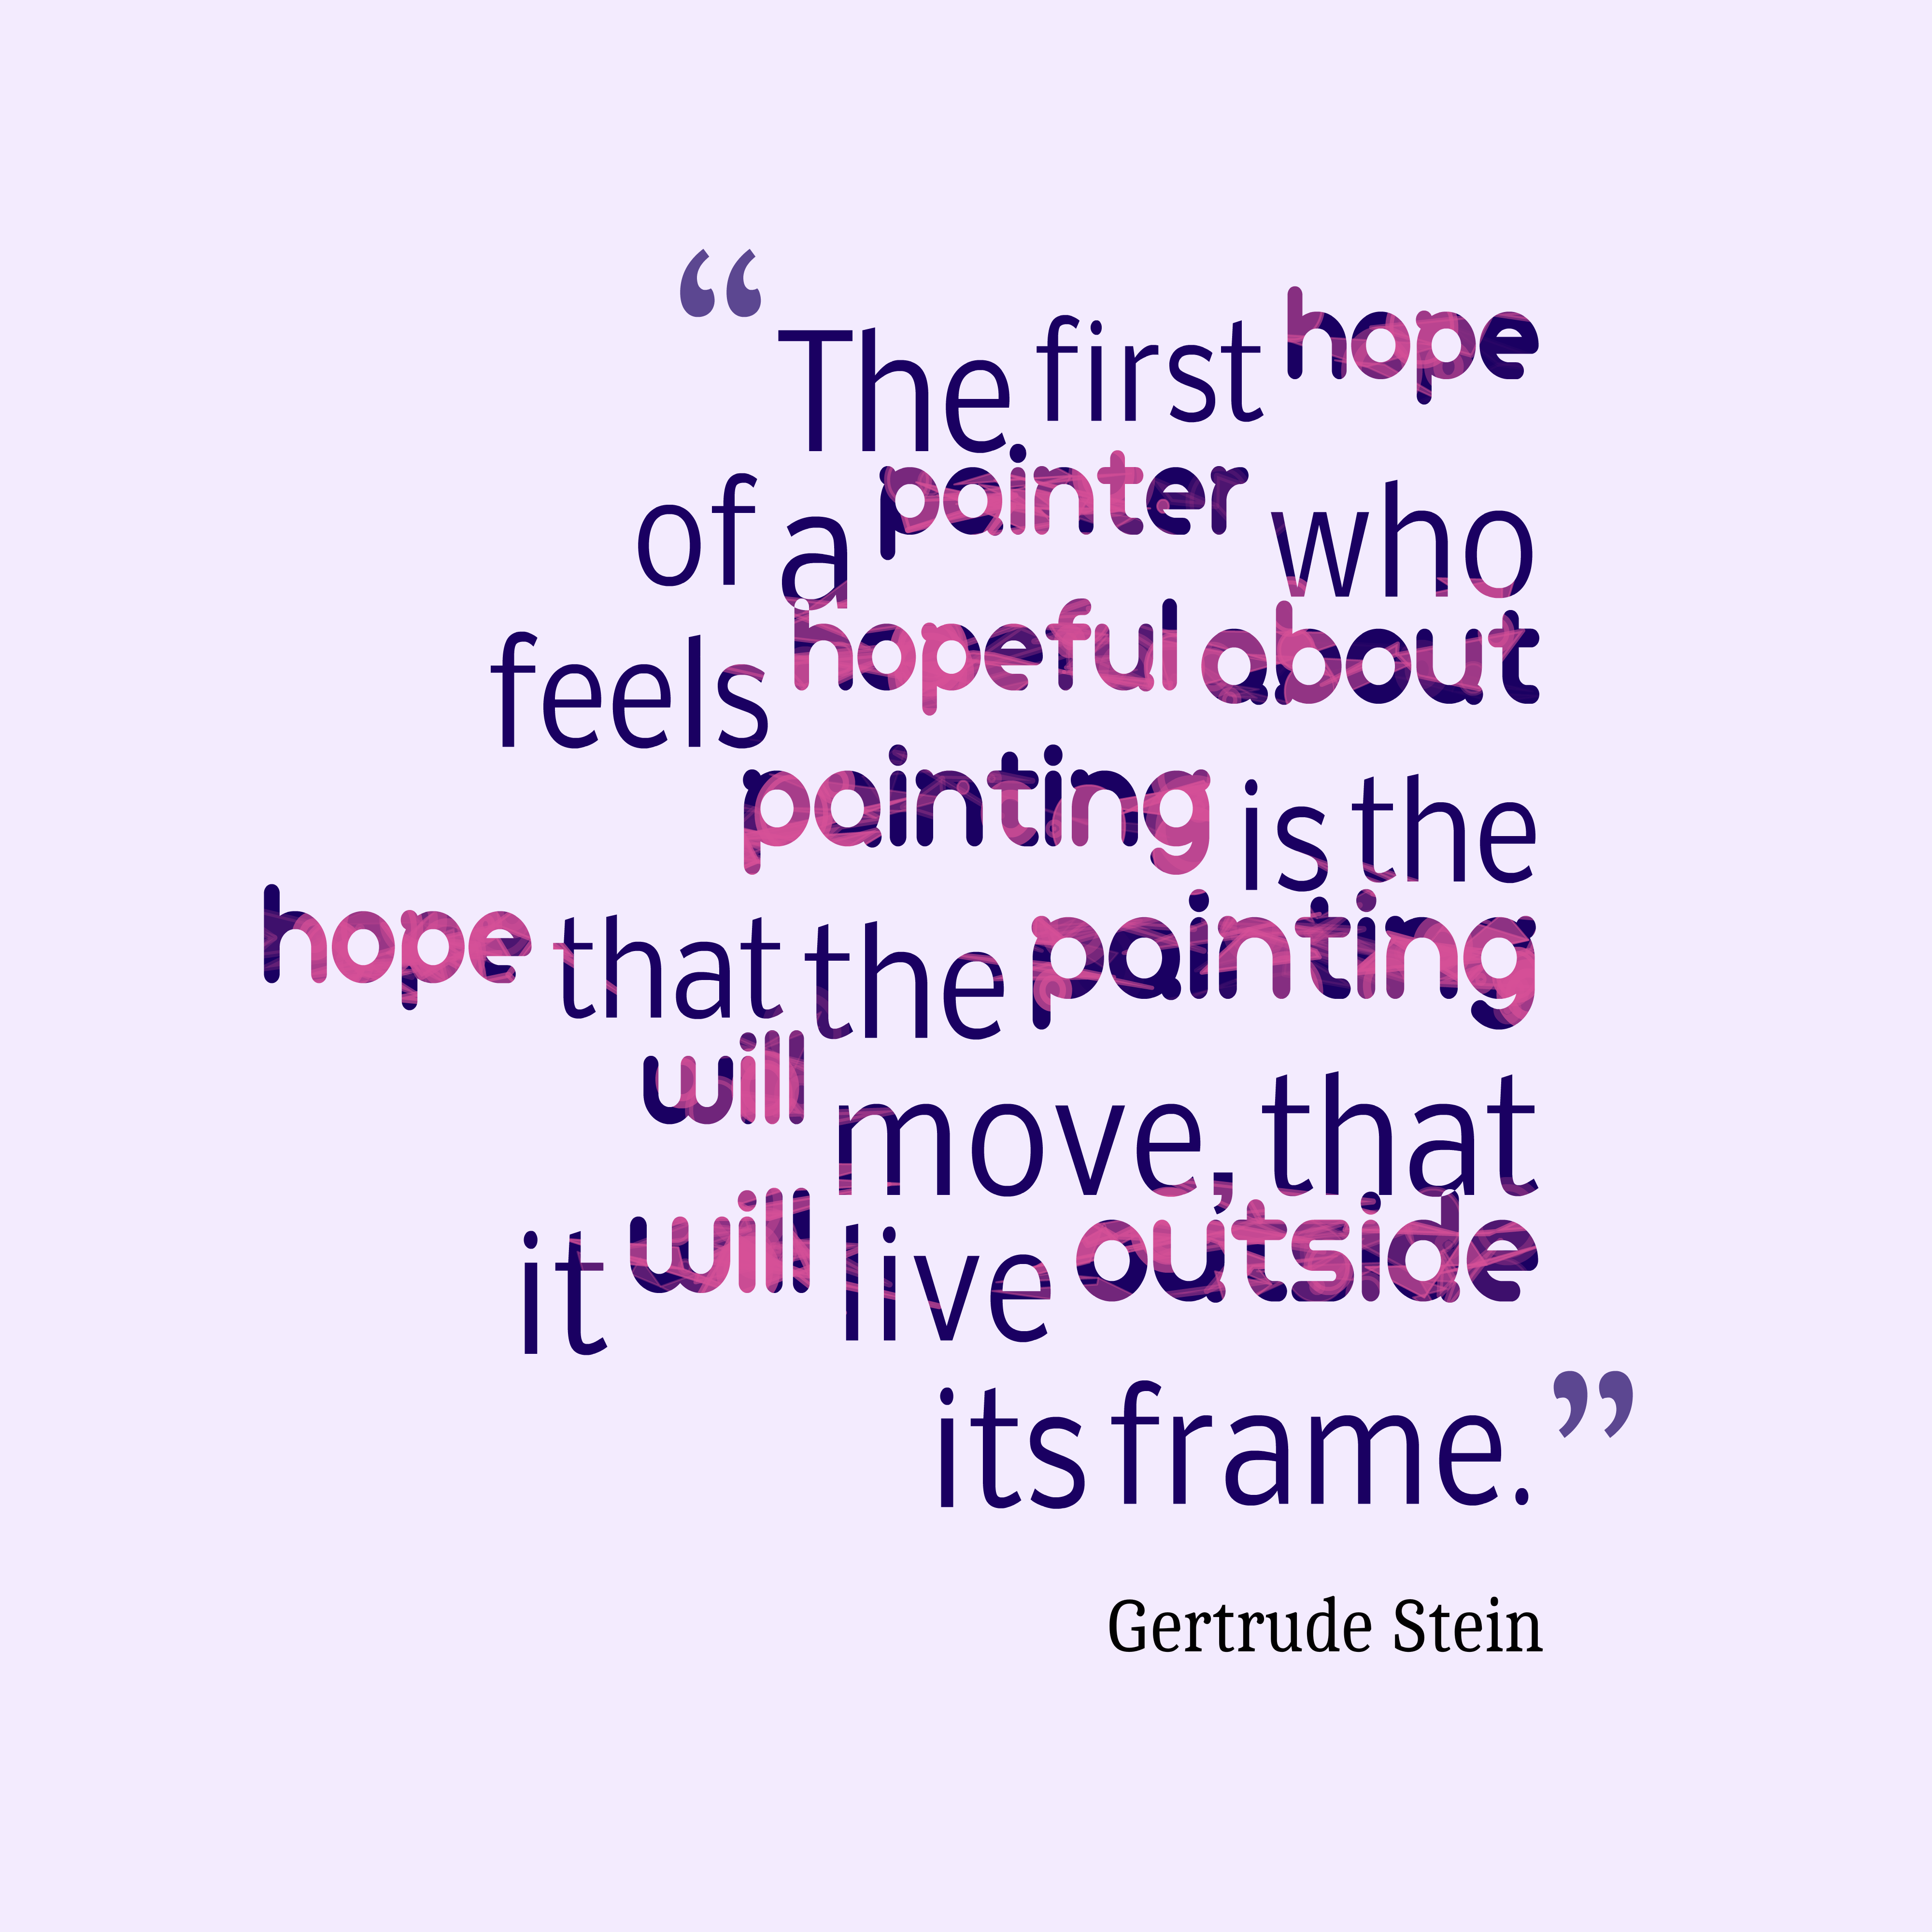 The first hope of a painter who feels hopeful about painting is the hope that the painting will move, that it will live outside its frame.